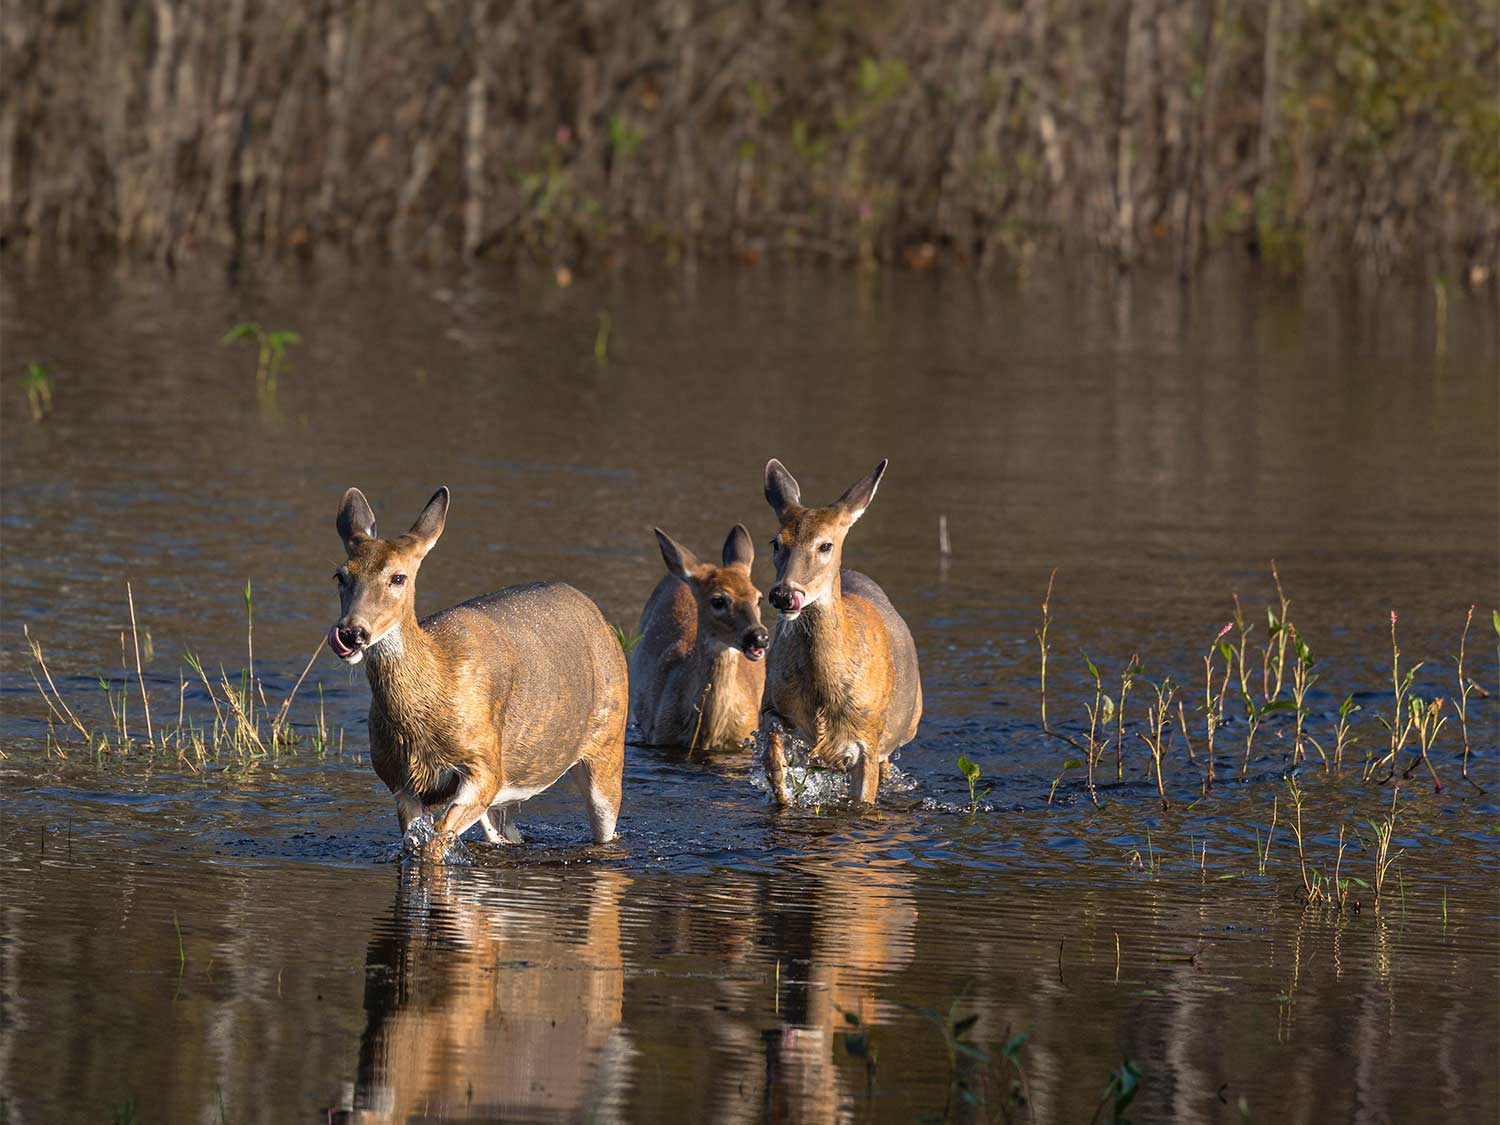 White-tailed deer walking in the water.